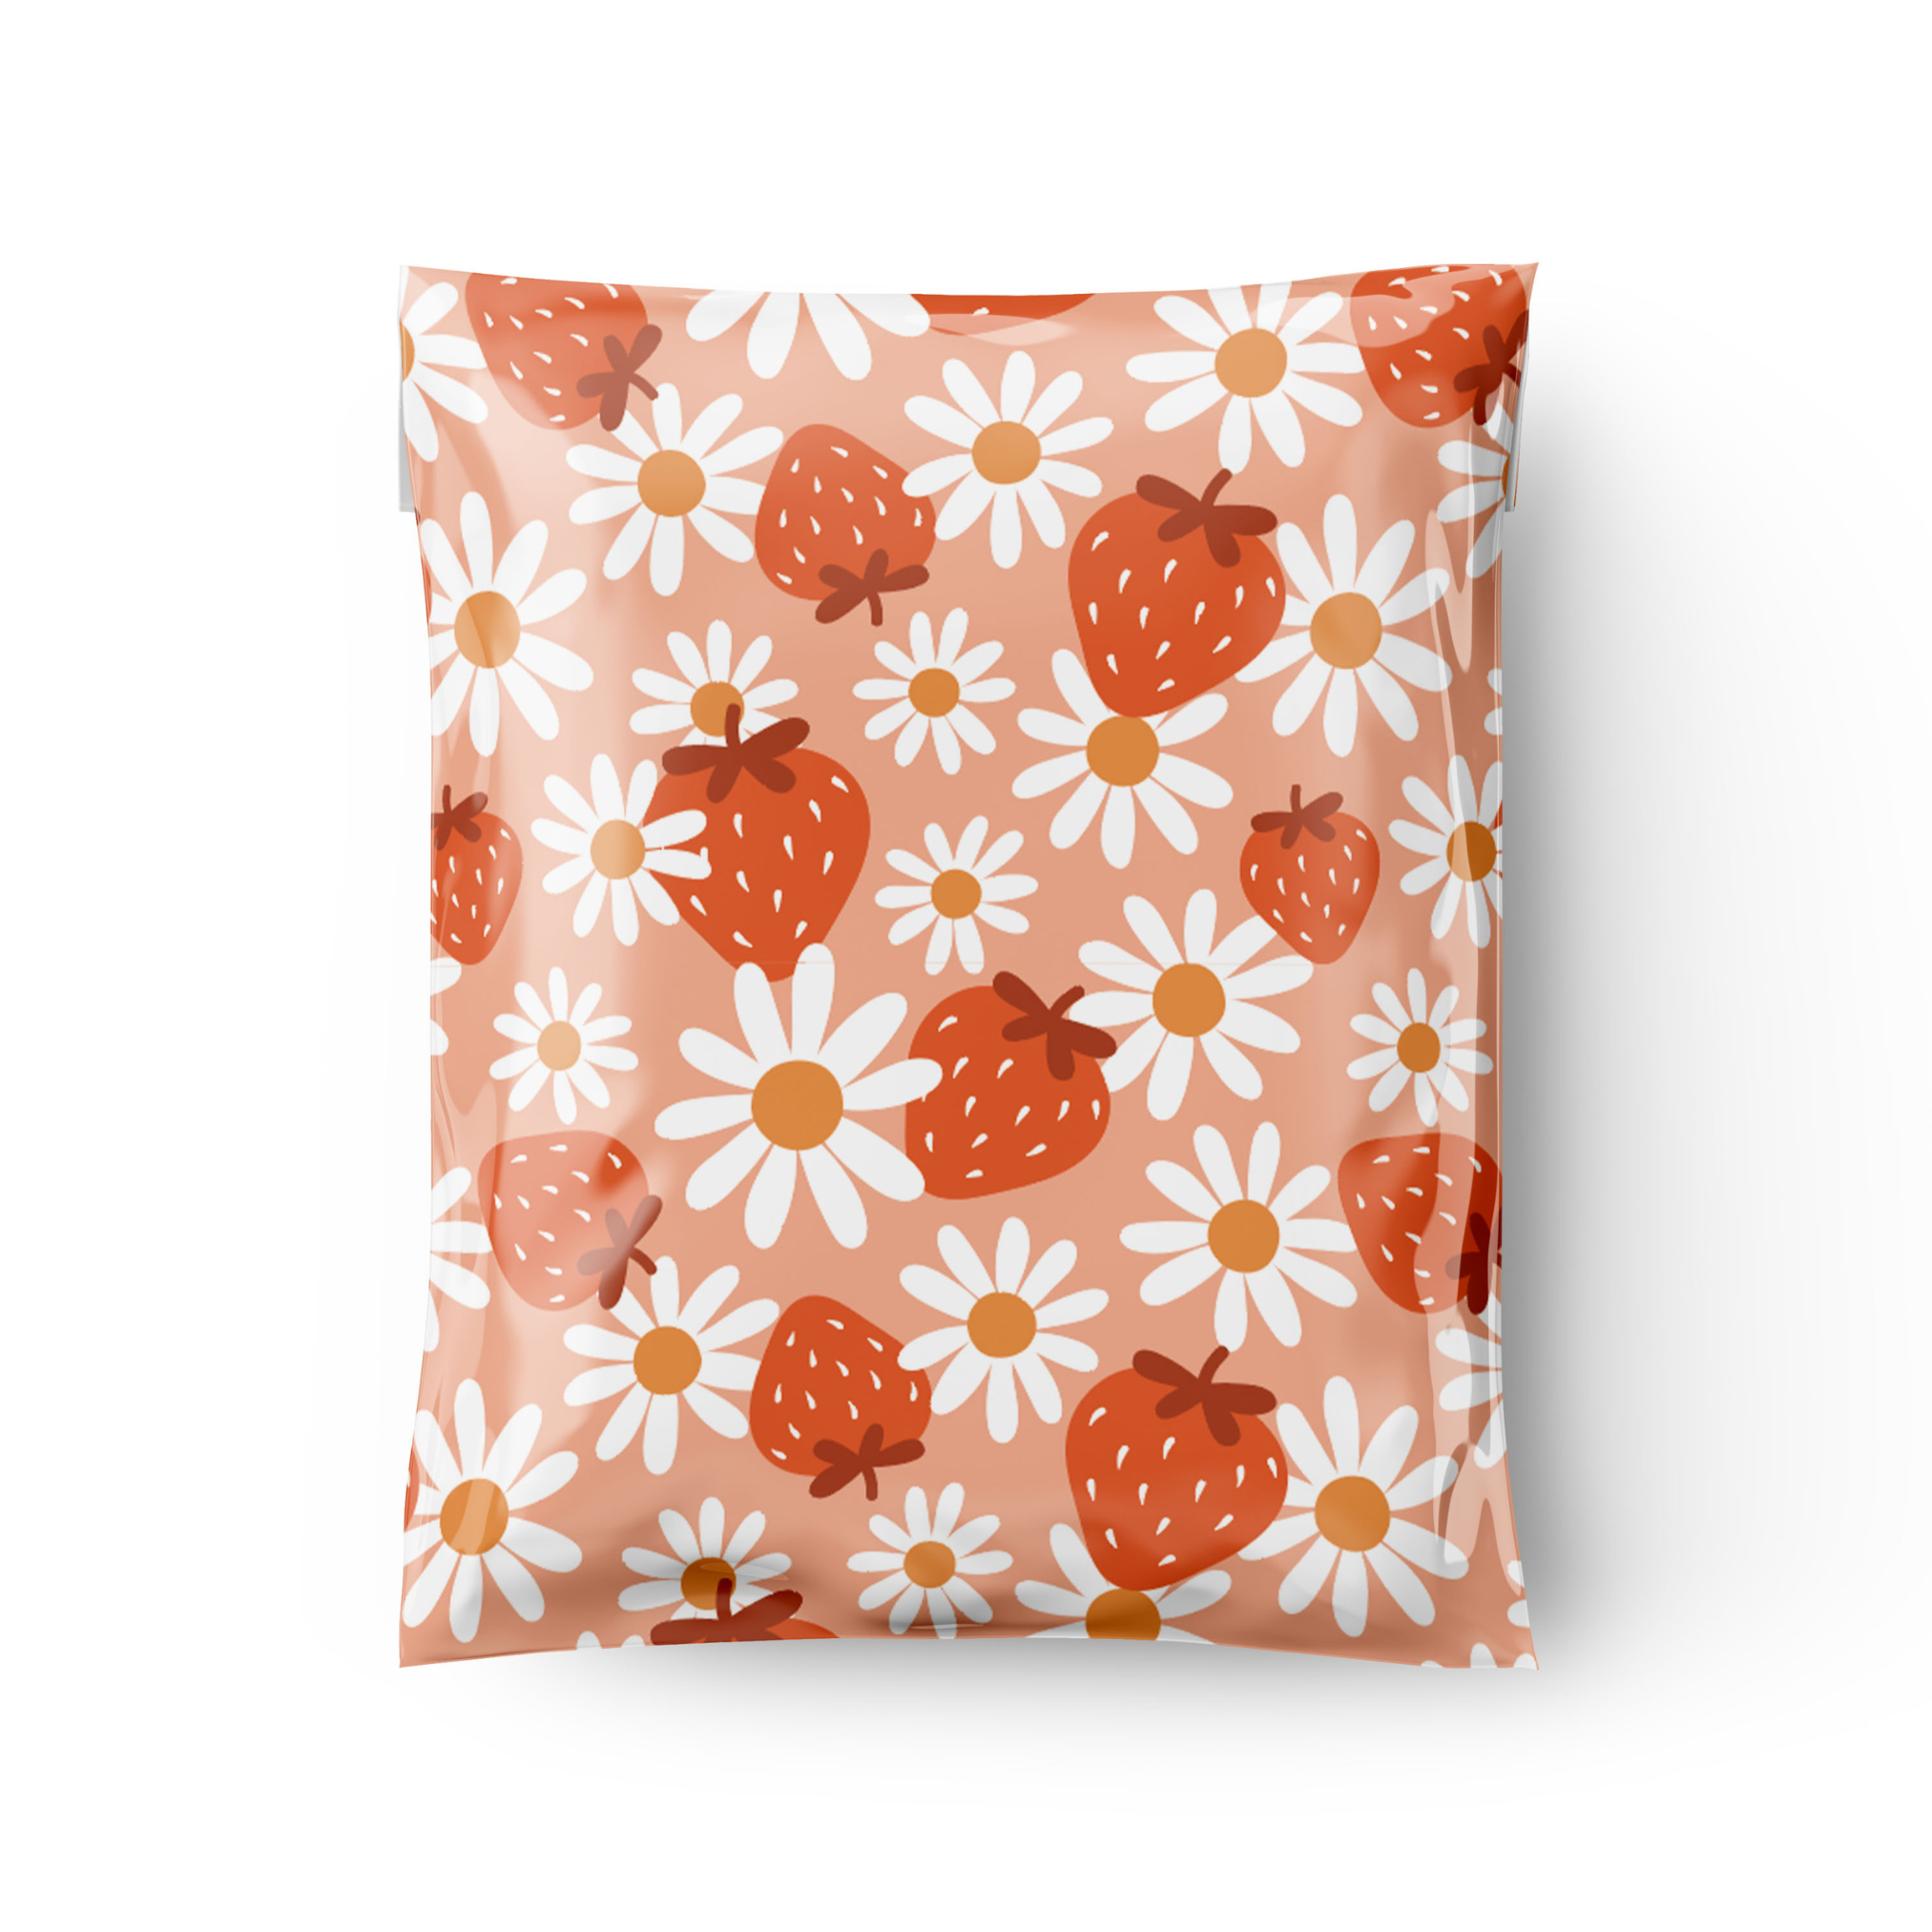 Daisy Berries - 10x13 Poly Mailer